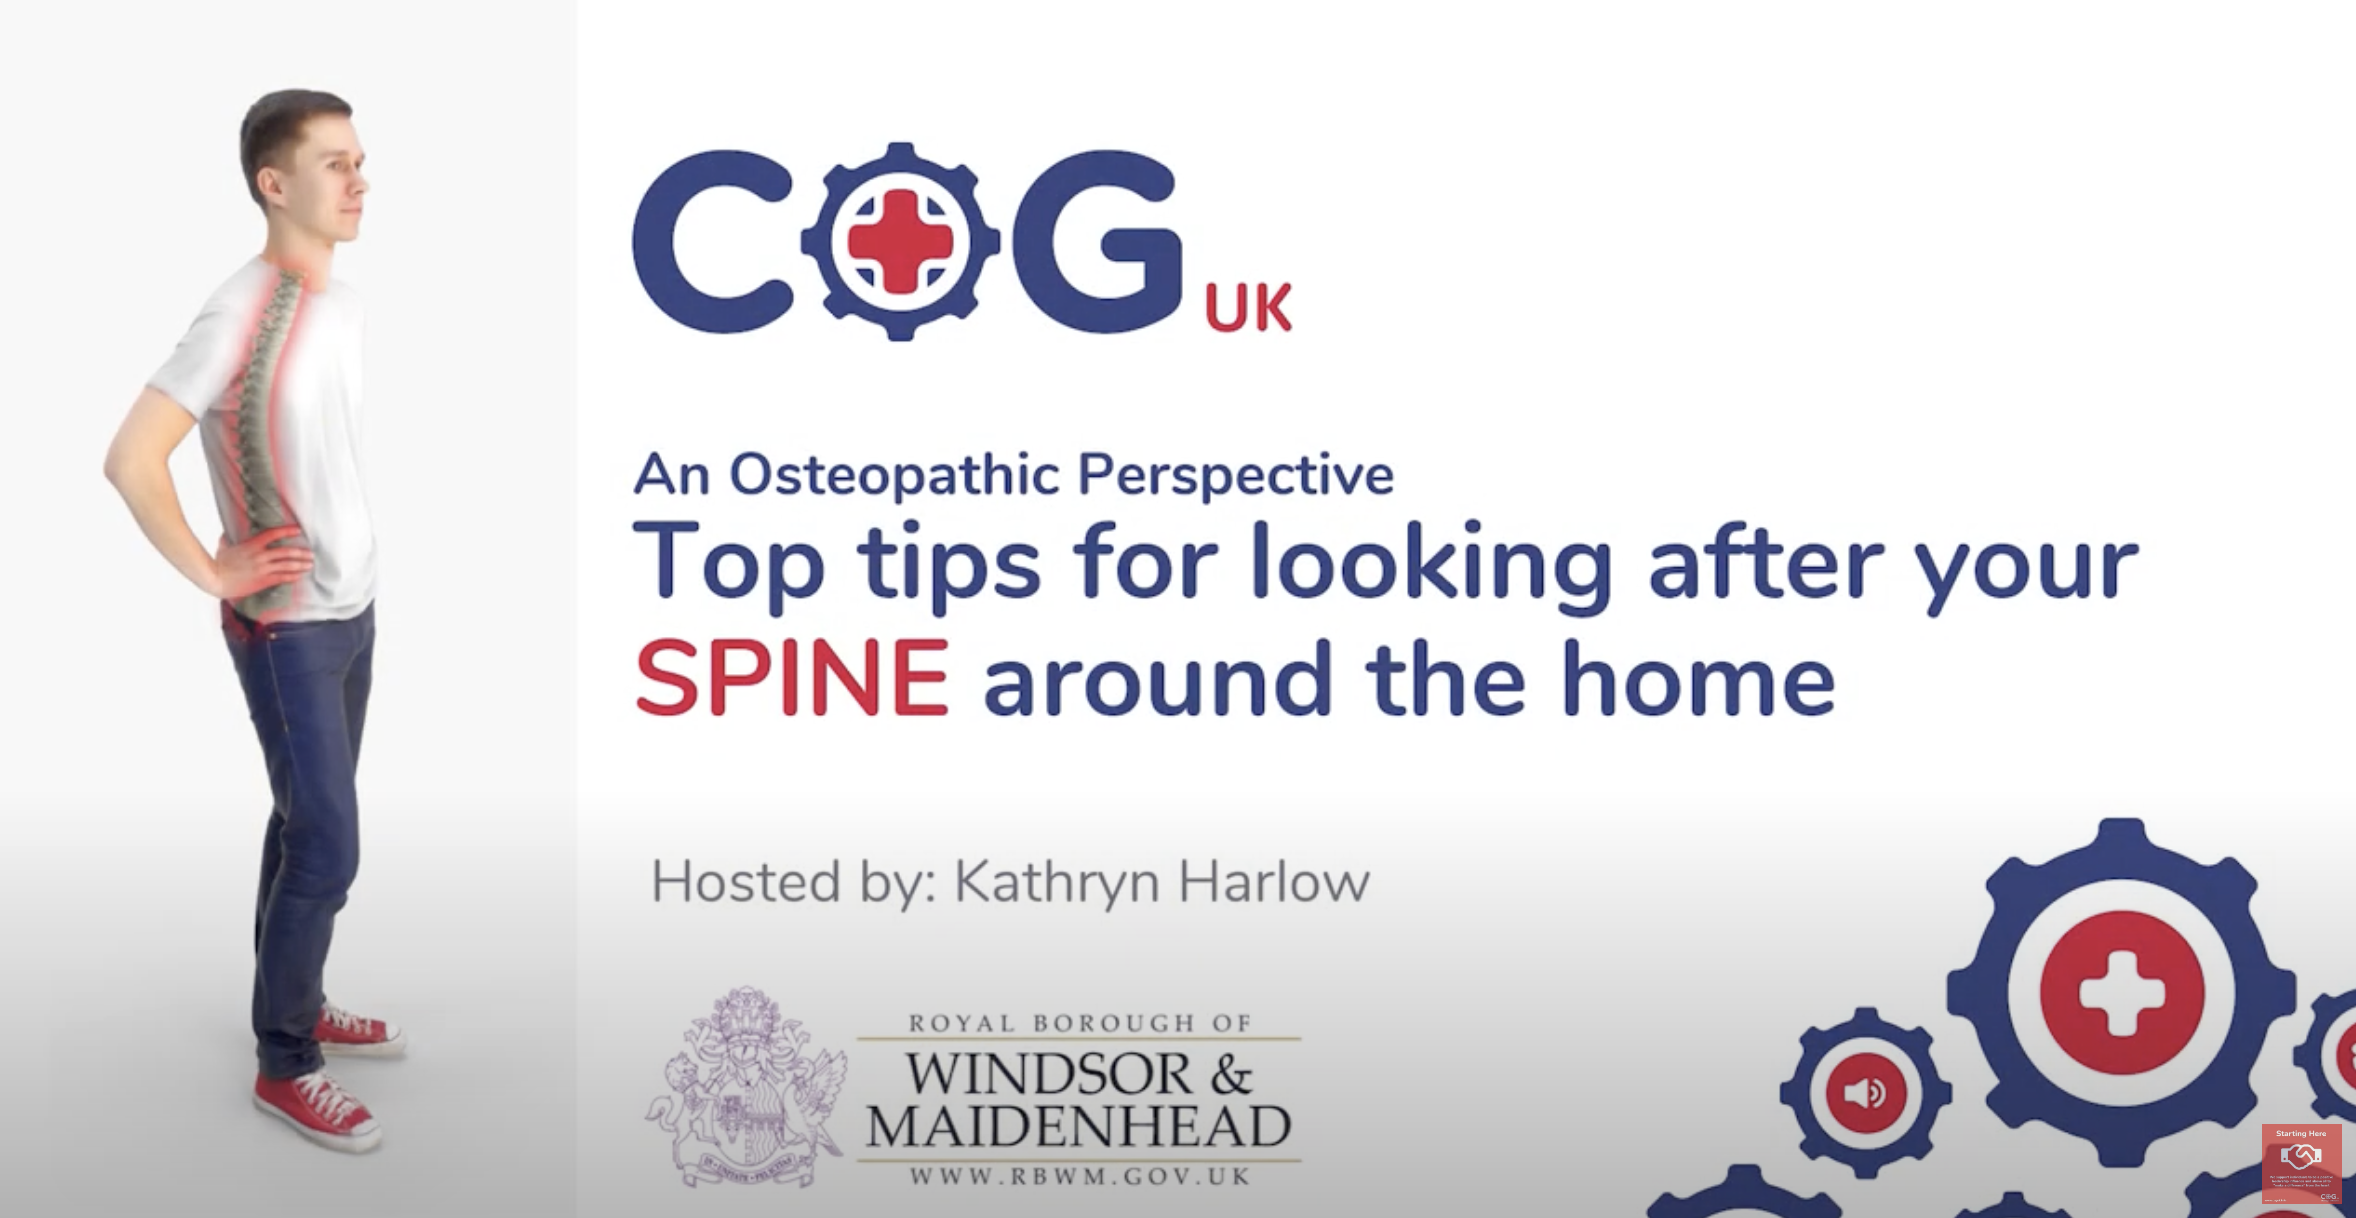 How Can You Look After Your Spine Around The Home?